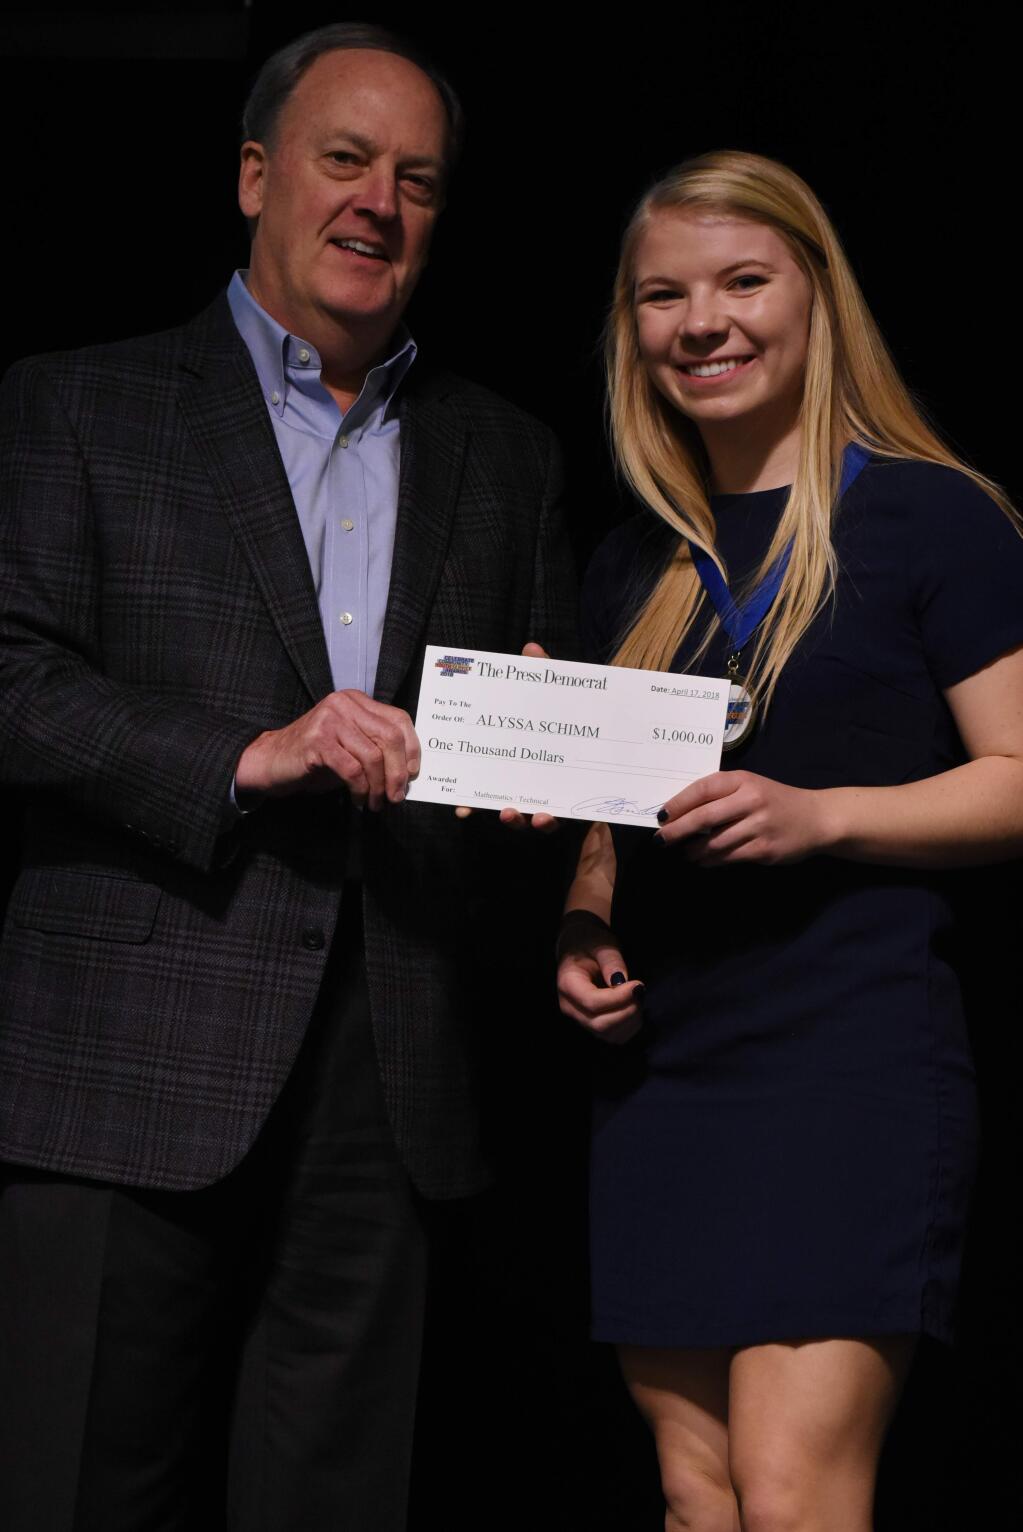 Award winner Alyssa Schimm with Steve Falk CEO of Sonoma Media Investments during The Press Democrat Celebrate Community Youth Service Awards 2018 held Tuesday at Luther Burbank Center for the Arts in Santa Rosa. April 17, 2018.(Photo: Erik Castro/for The Press Democrat)